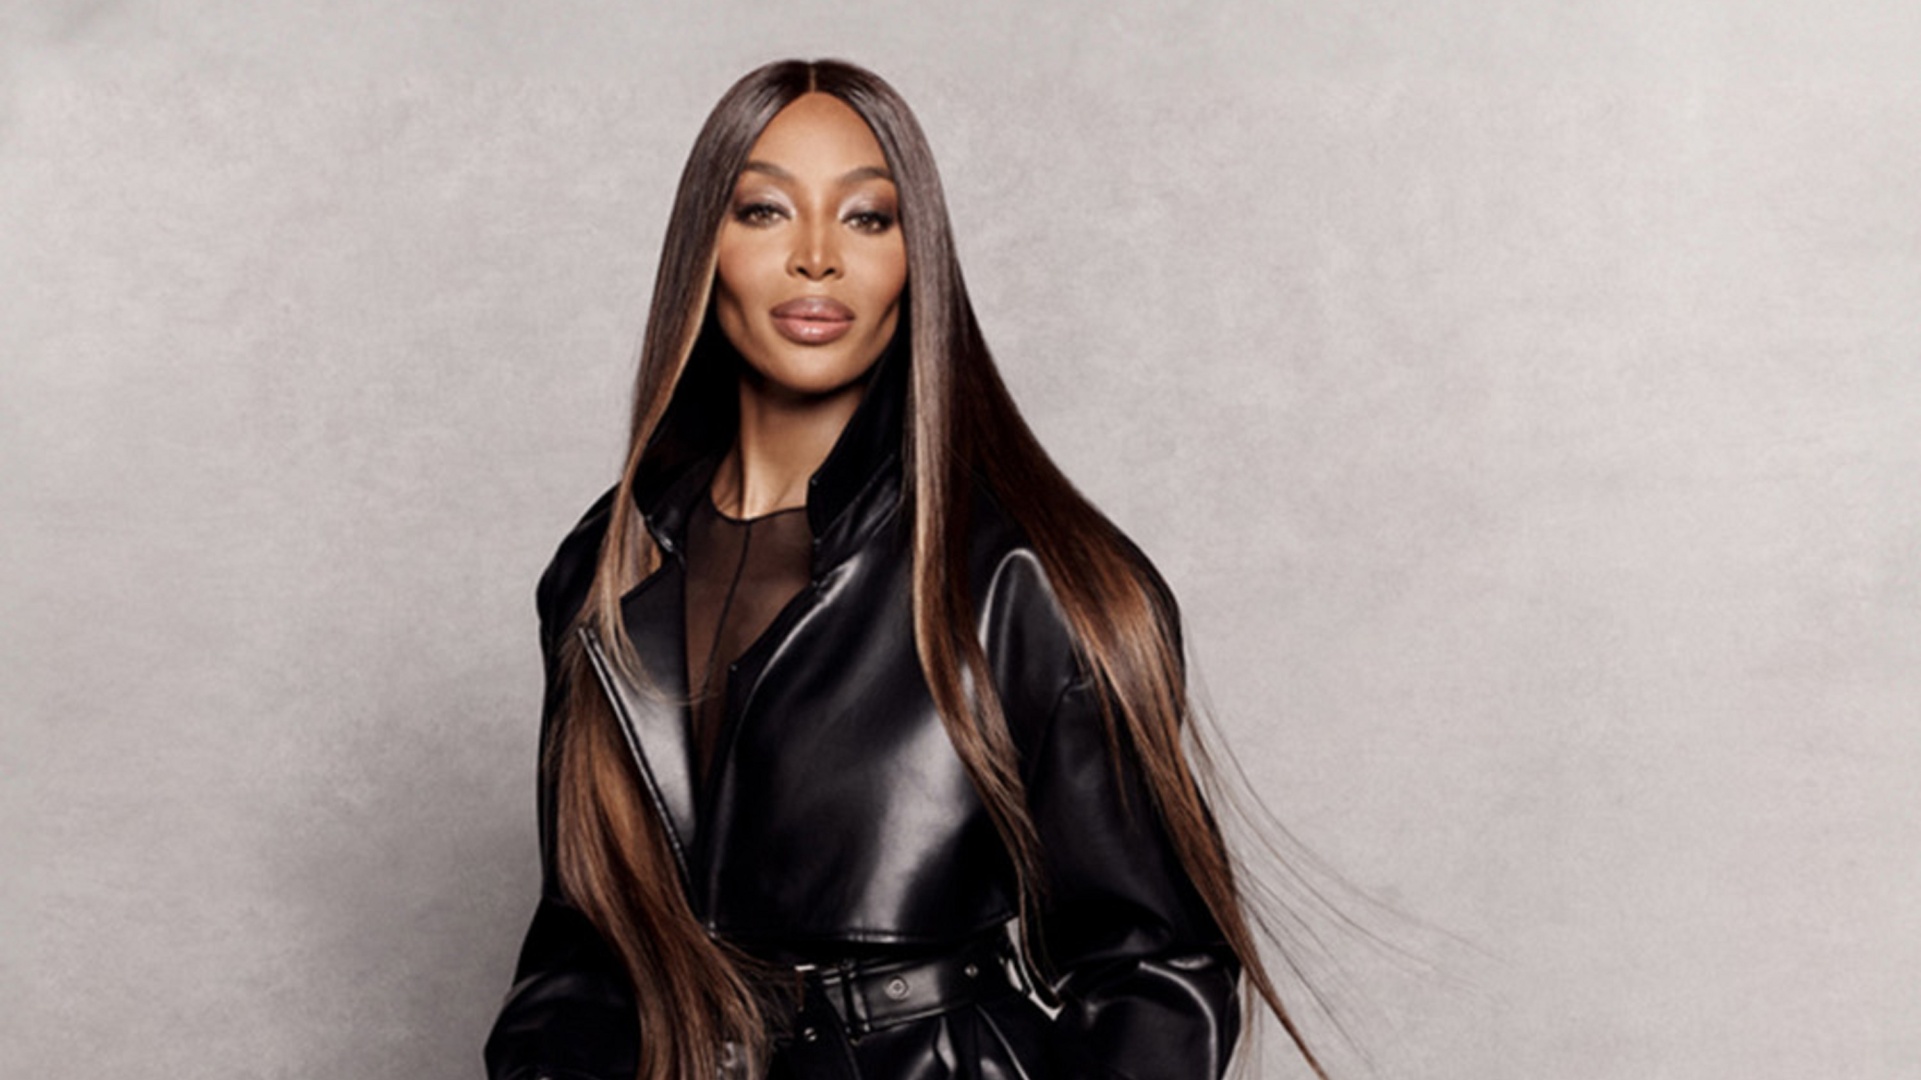 Naomi Campbell Partners With PrettyLittleThing For New Collection